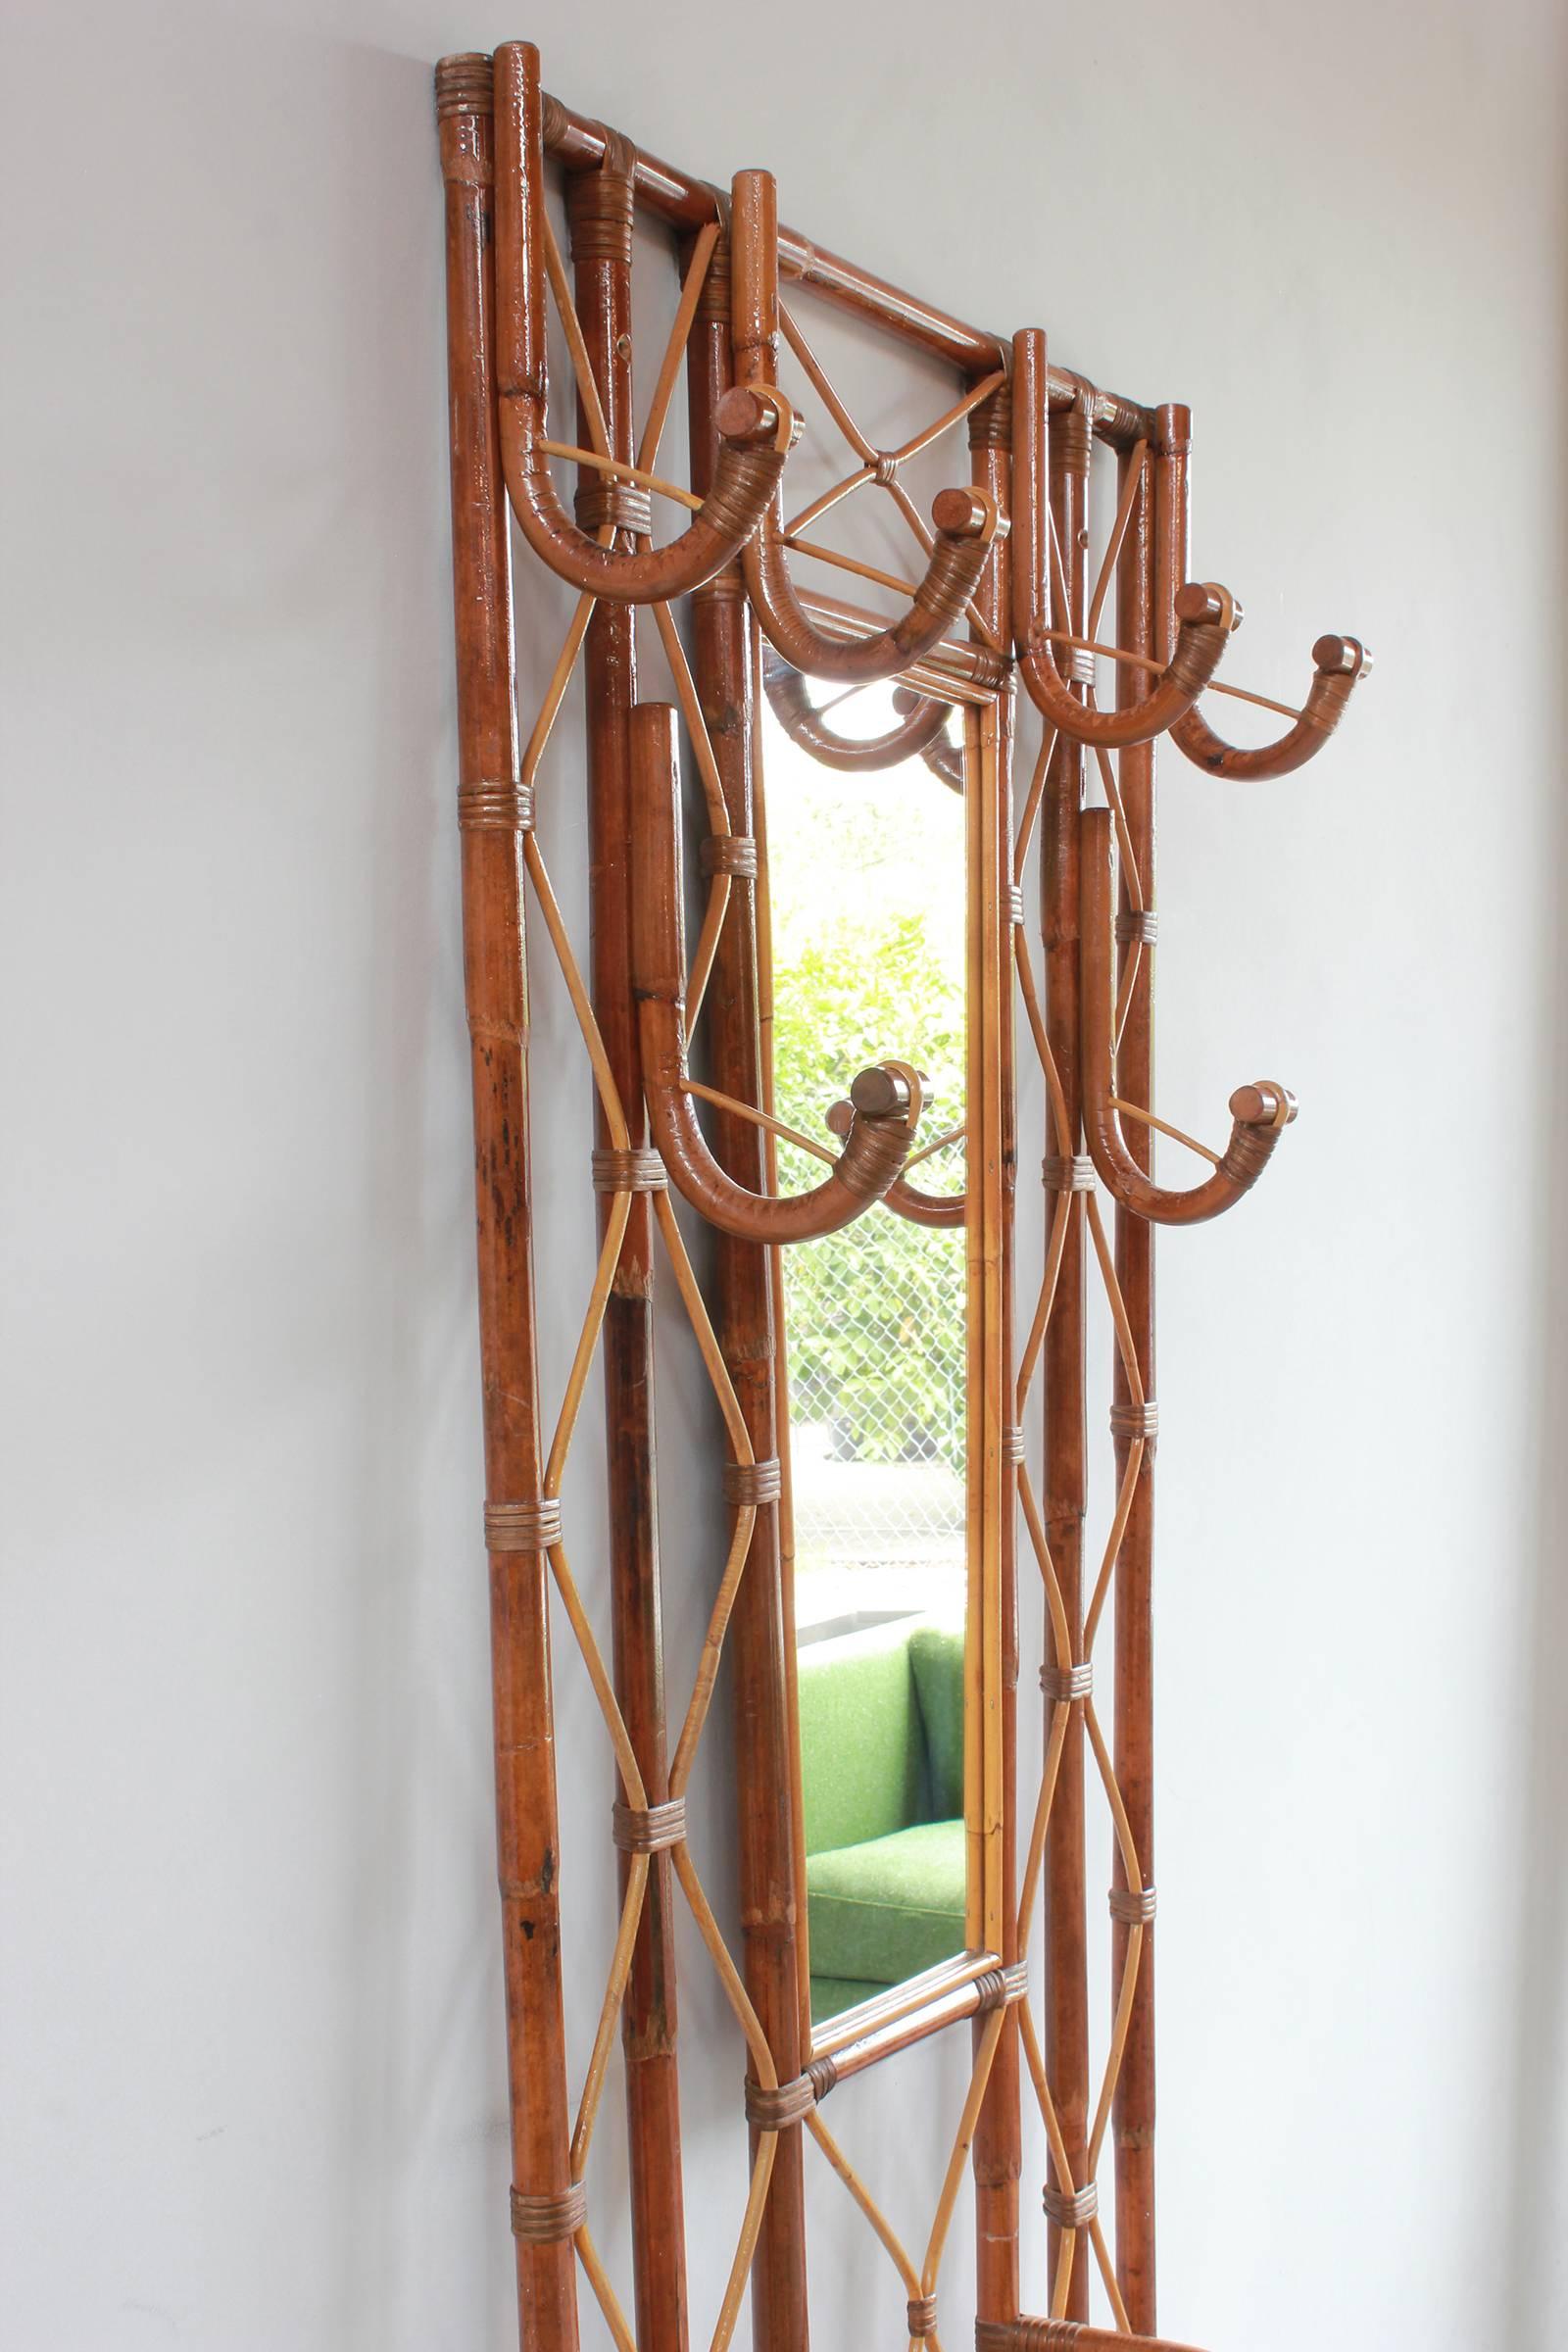 Mid-20th Century French Bamboo Tree Coat Rack with Built in Mirror and Umbrella Stand